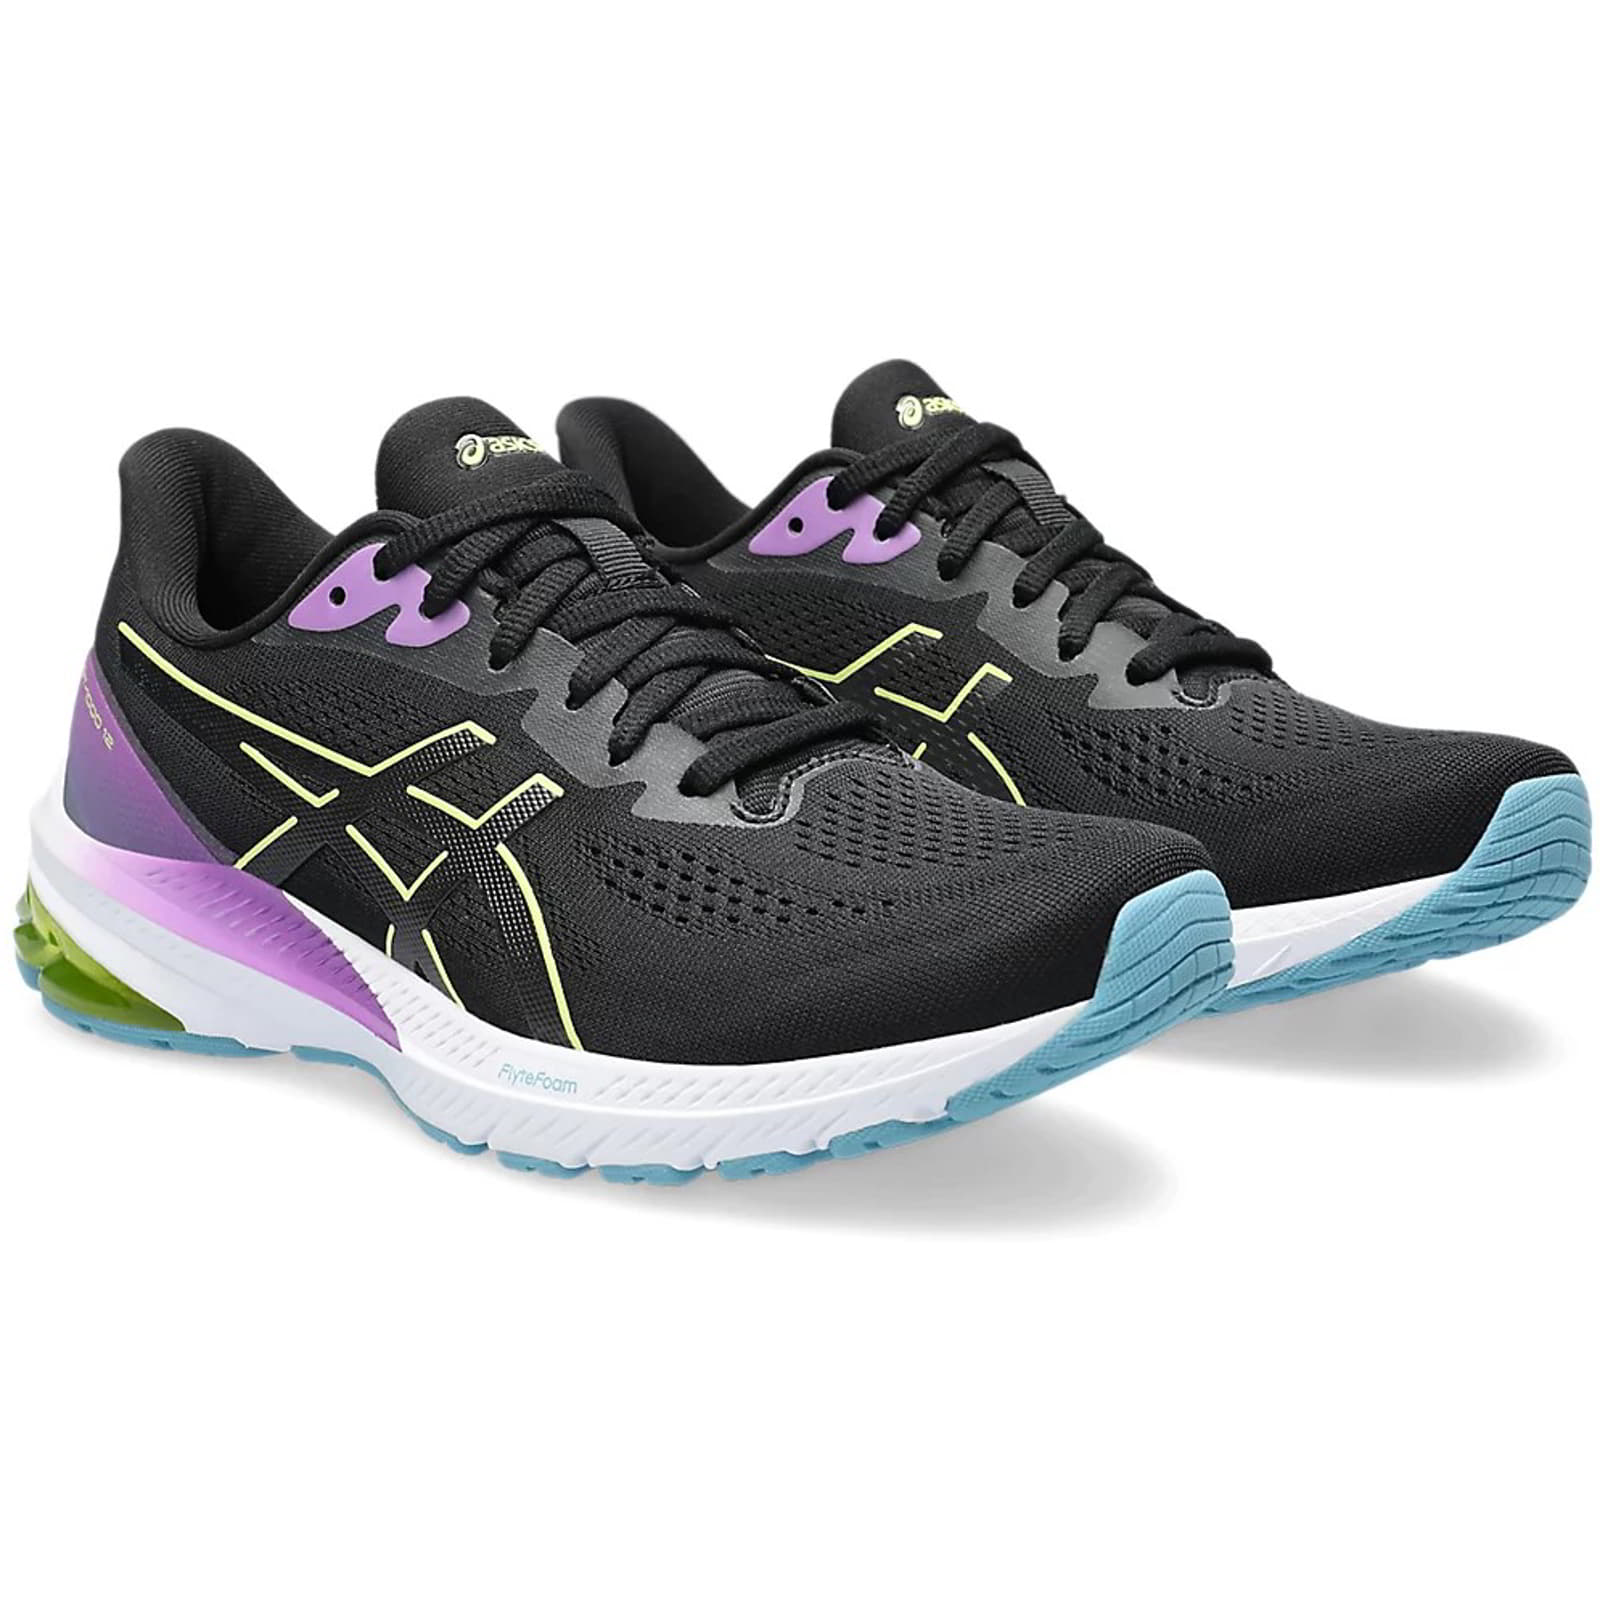 Asics Women's GT-1000 12 Running Shoes Trainers - UK 6.5